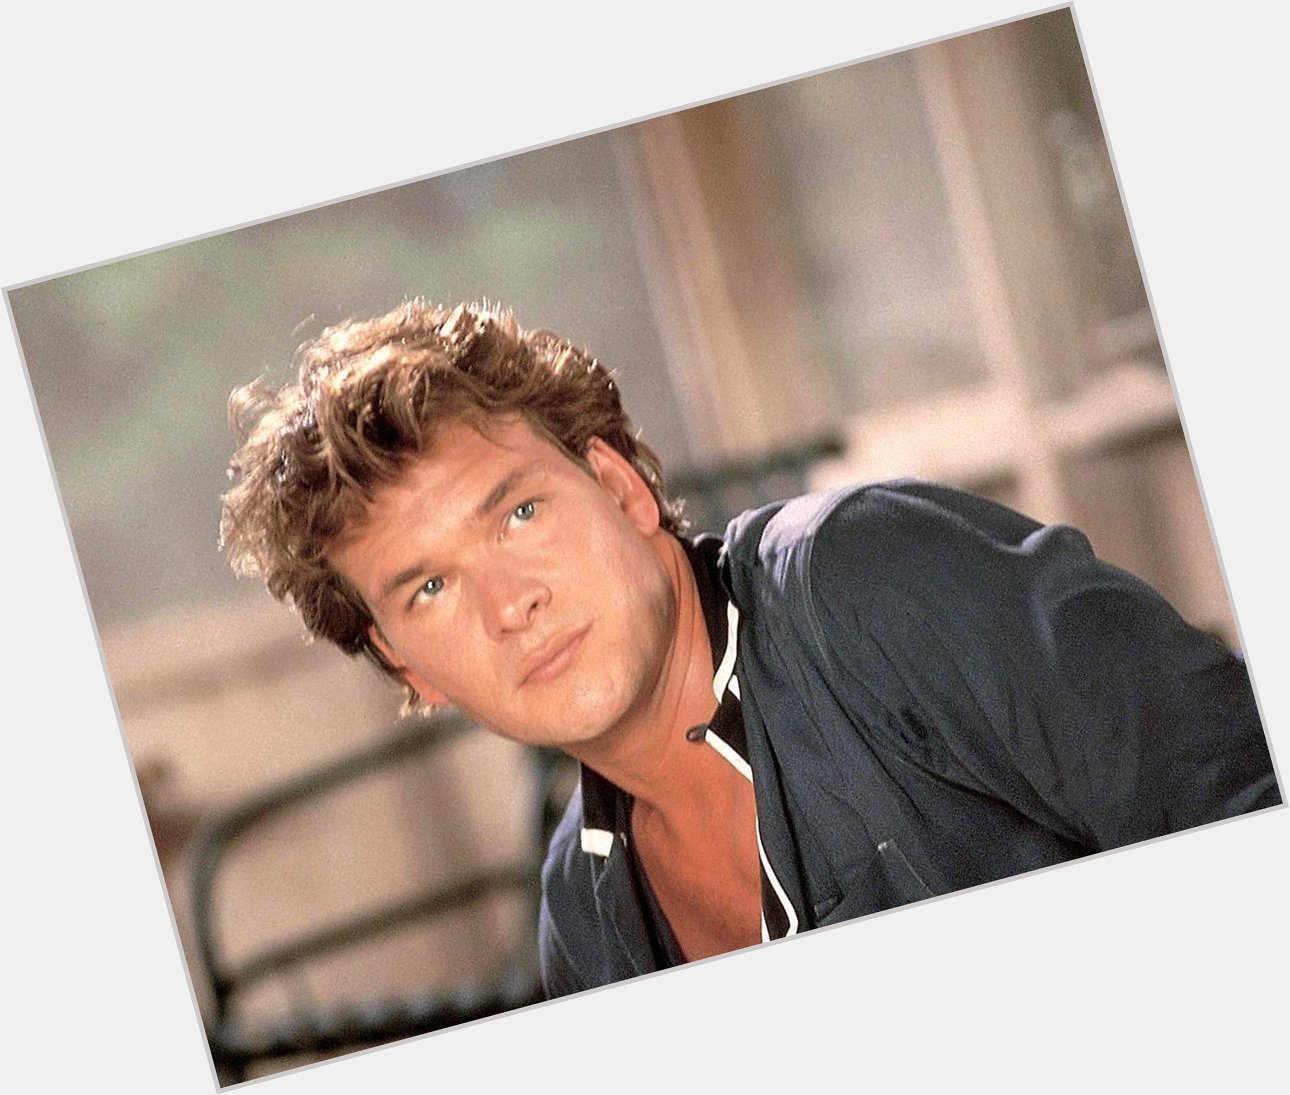 Room Rater Happy Birthday in Memoriam. Patrick Swayze was born this day in 1952. 10/10 